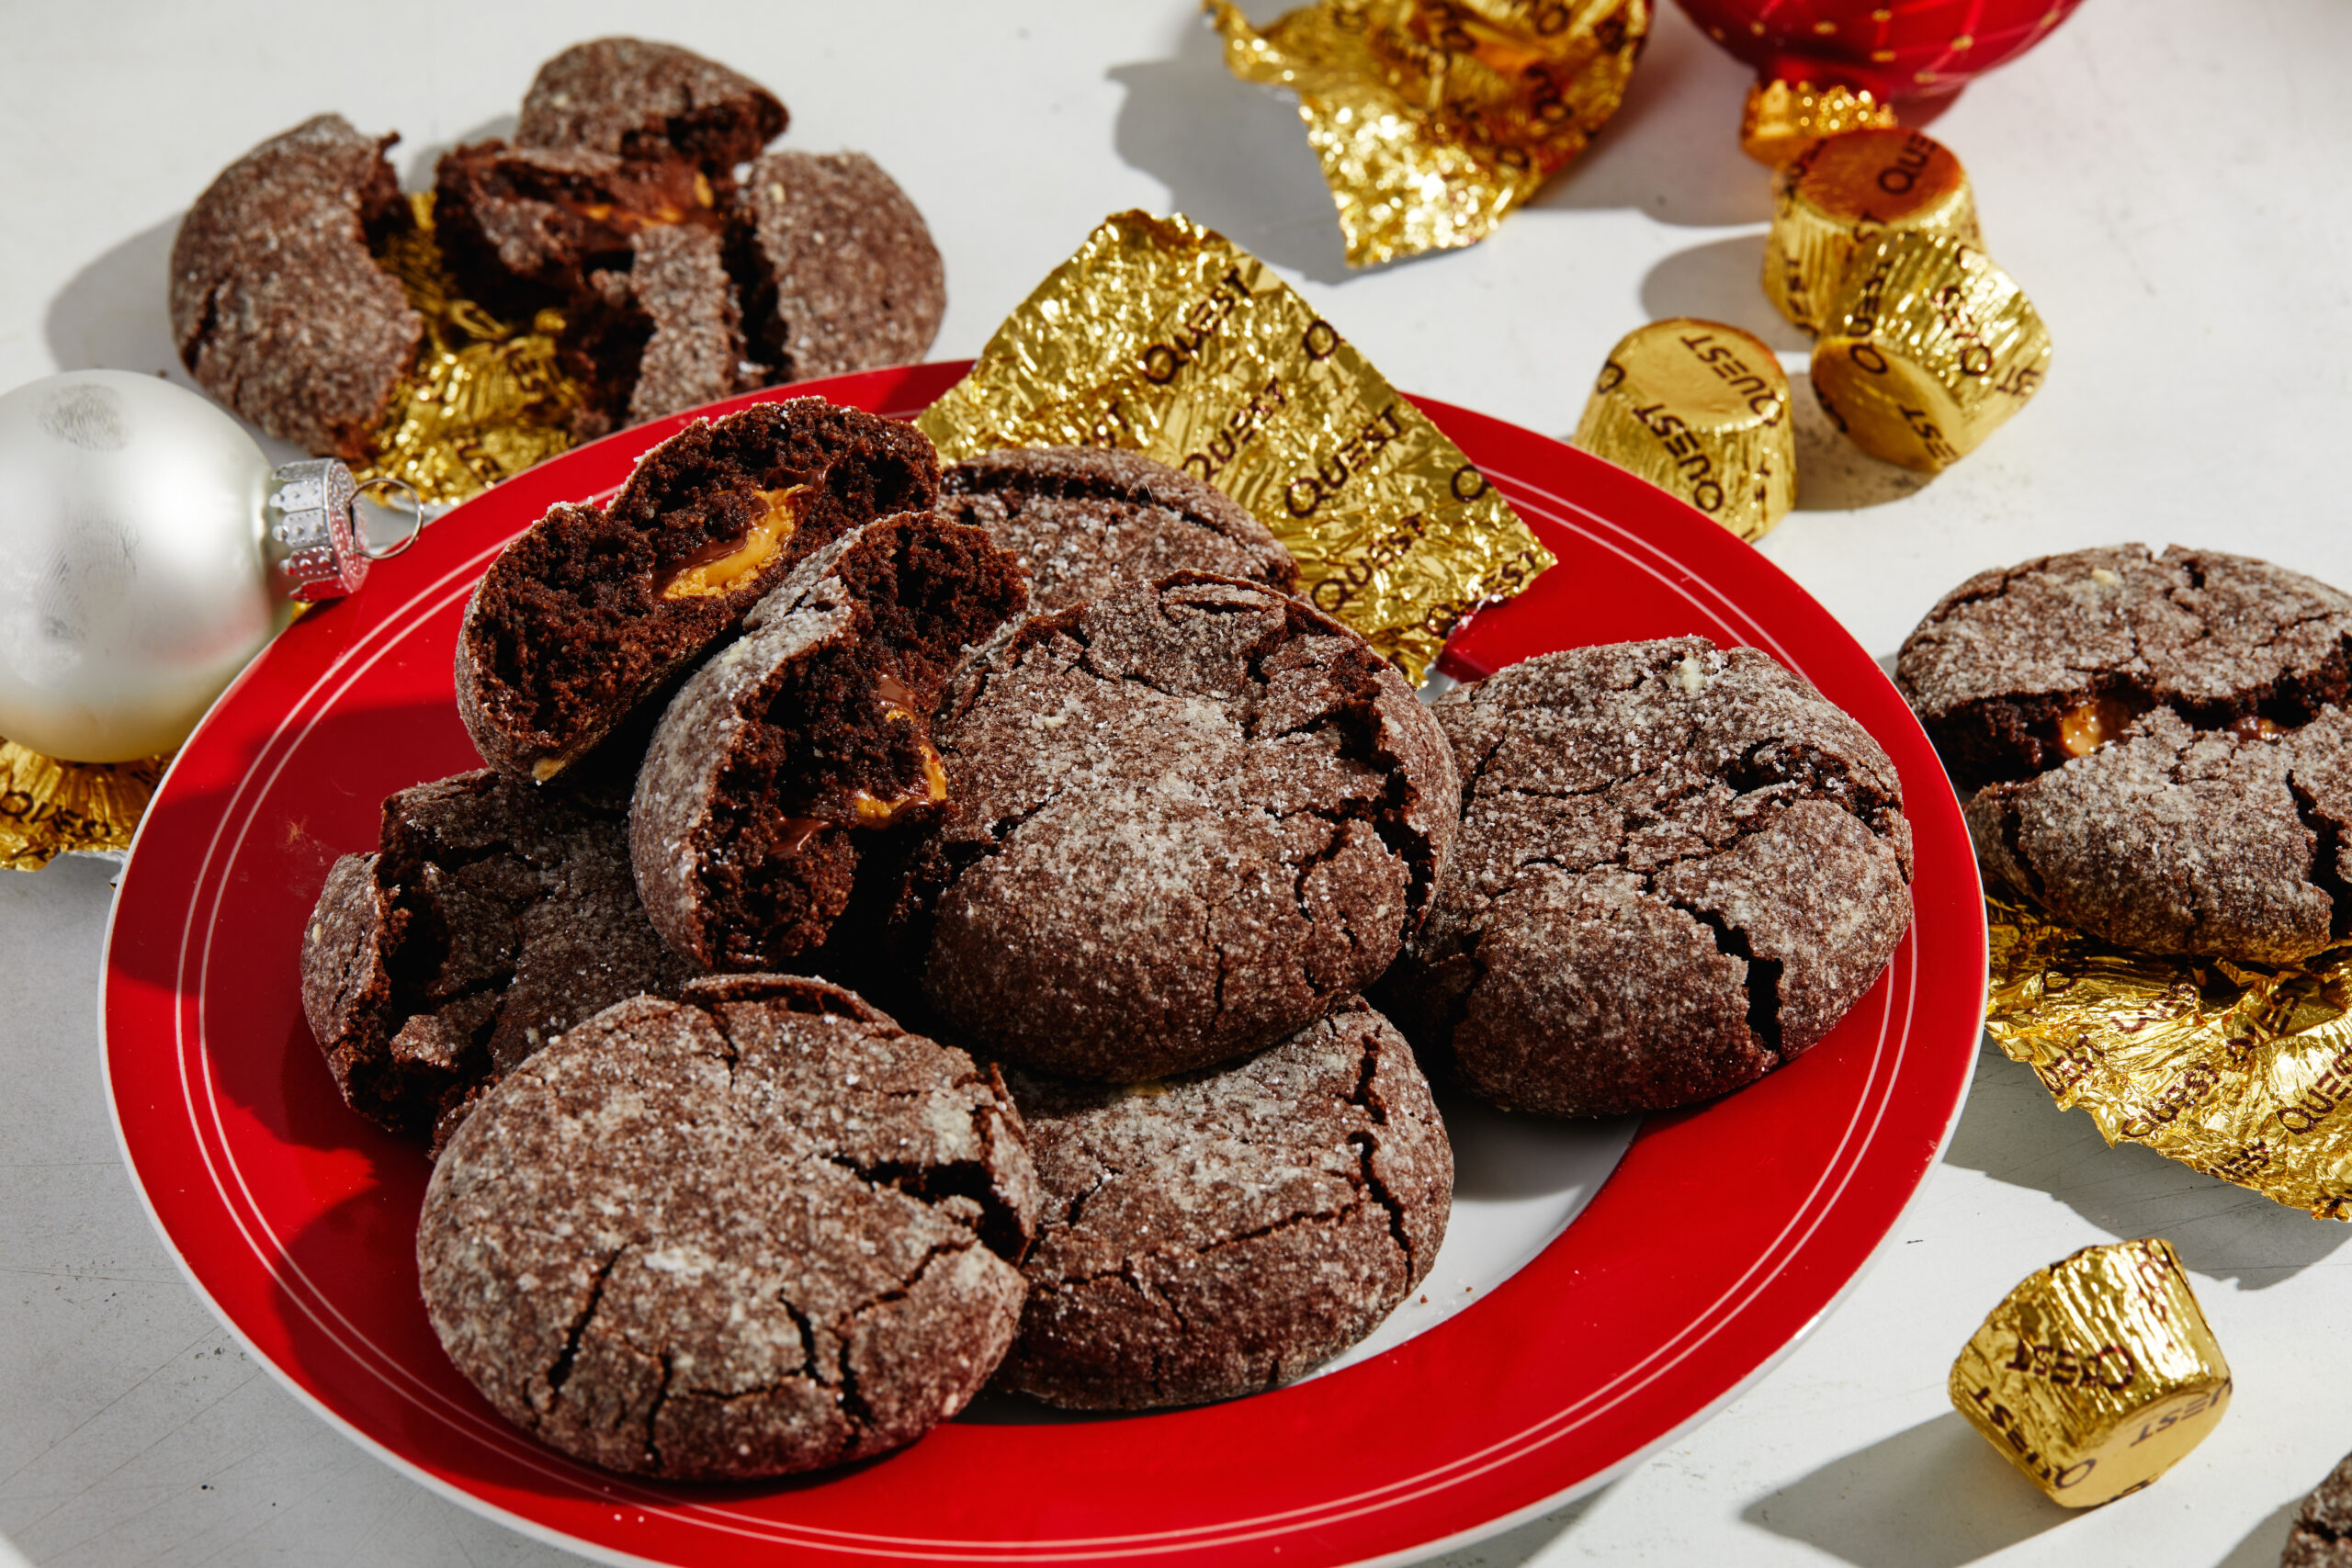 Quest Peanut Butter Cup Stuffed Chocolate Crinkle Cookies